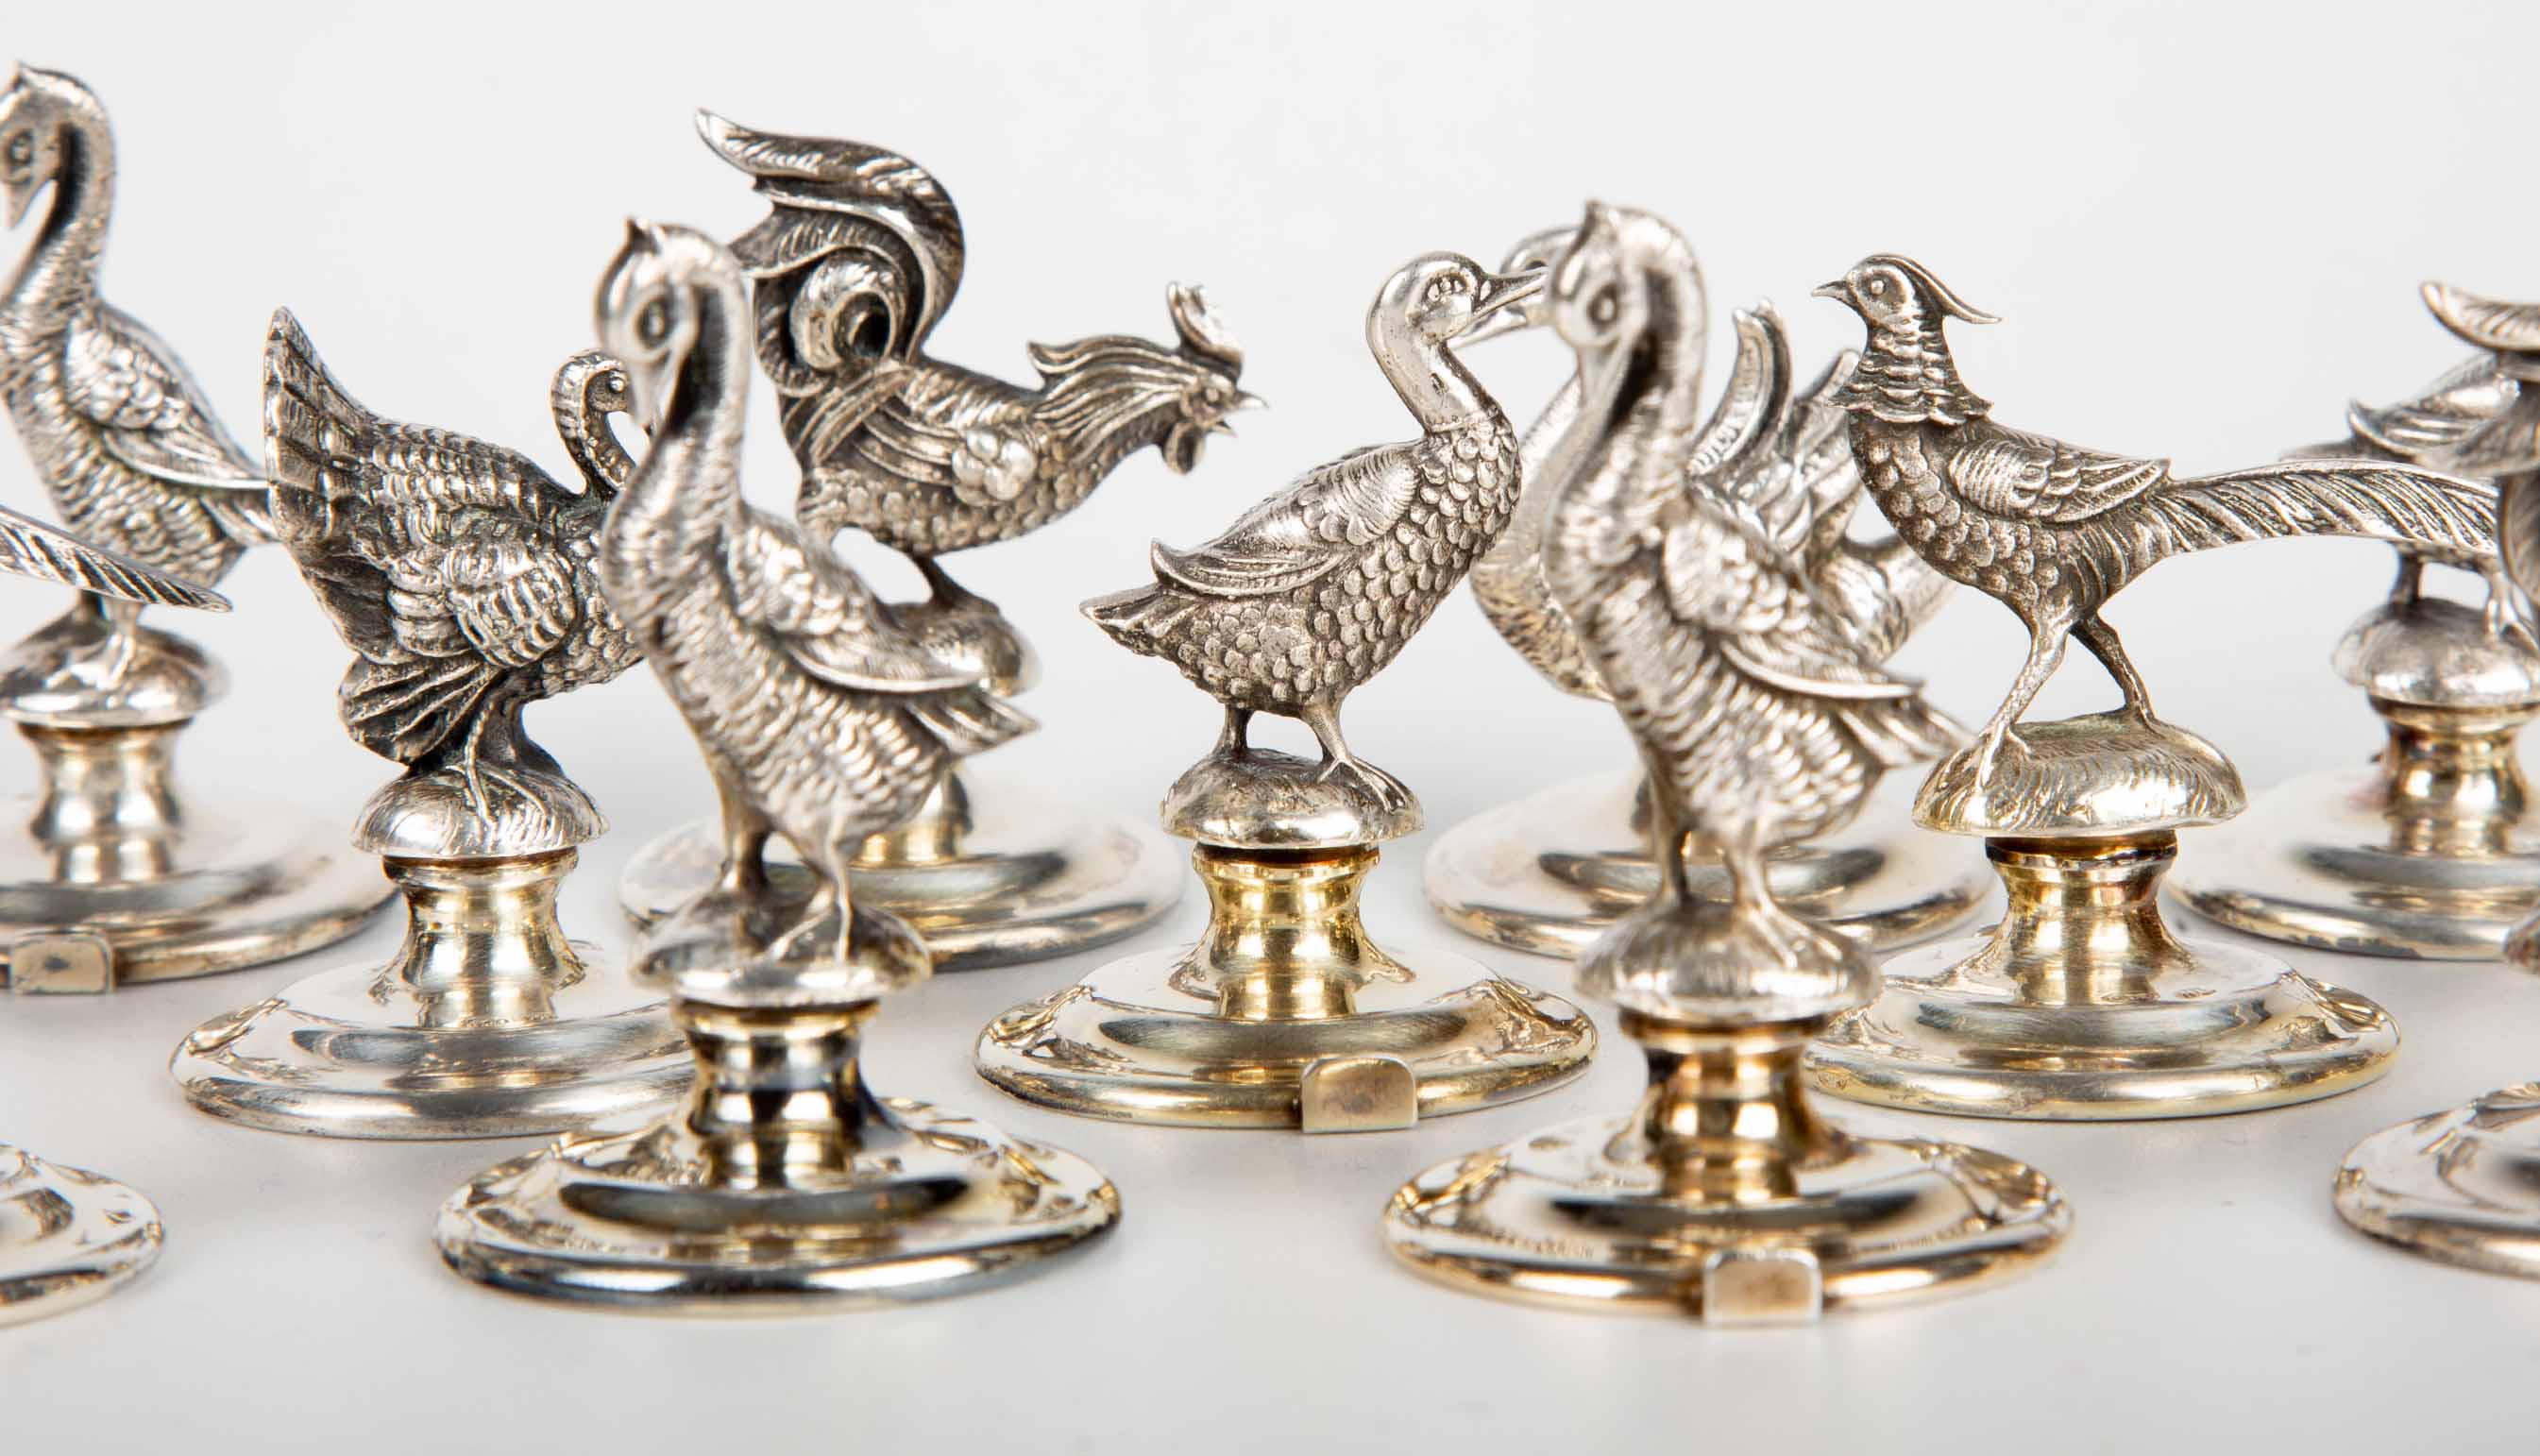 Rare Set of 18 Italian Silver Bird or Fowl Place Card Holders